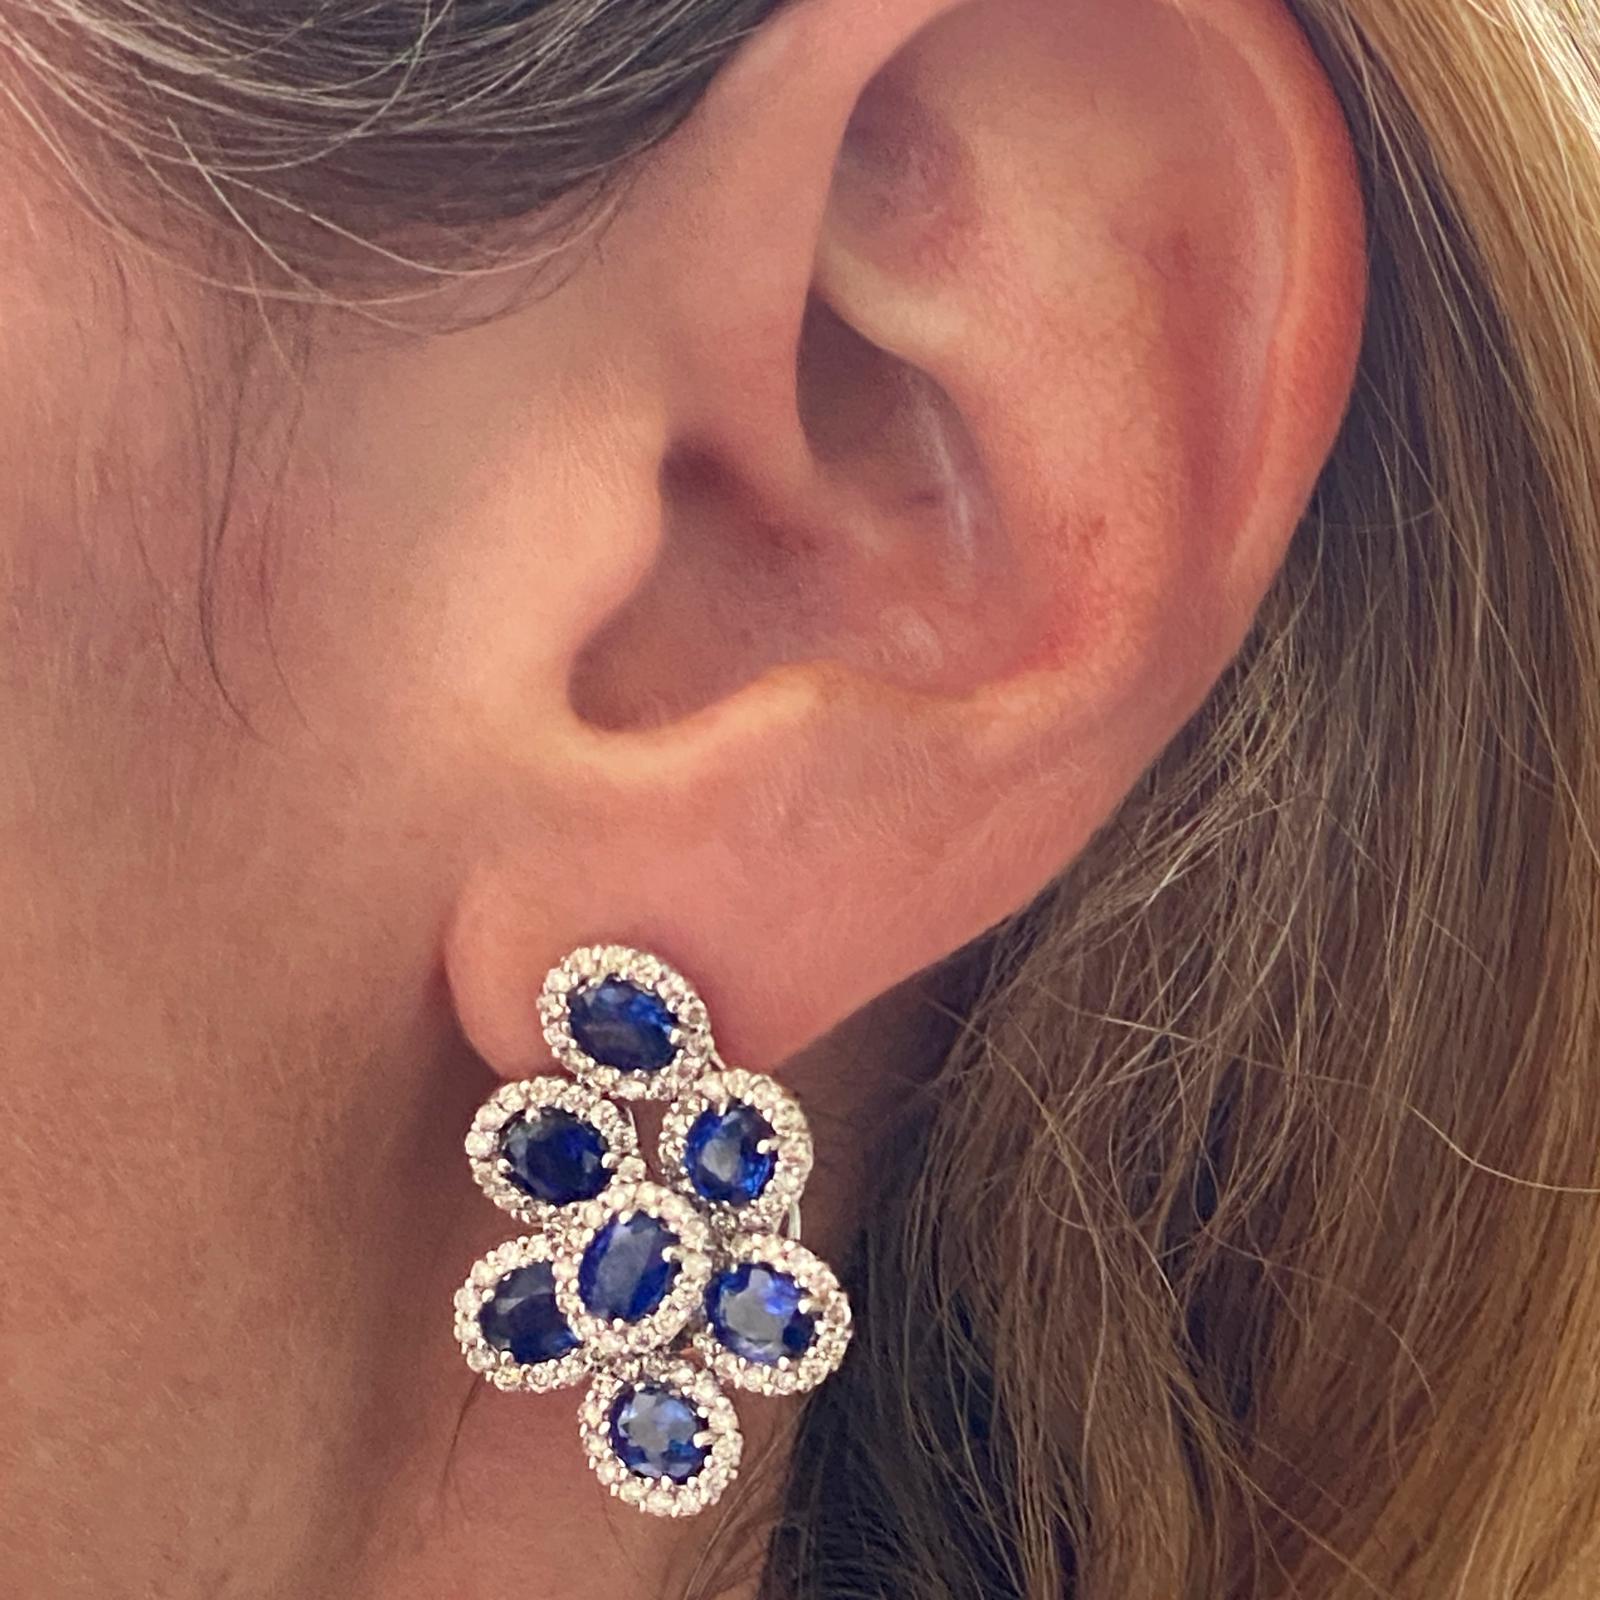 Gorgeous sapphire diamond earrings fashioned in 18 karat white gold. The earrings feature 14 natural blue sapphires weighing 6.30 carat total weight. The sapphires are surrounded by round brilliant cut diamonds weighing 2.18 carat total weight. The